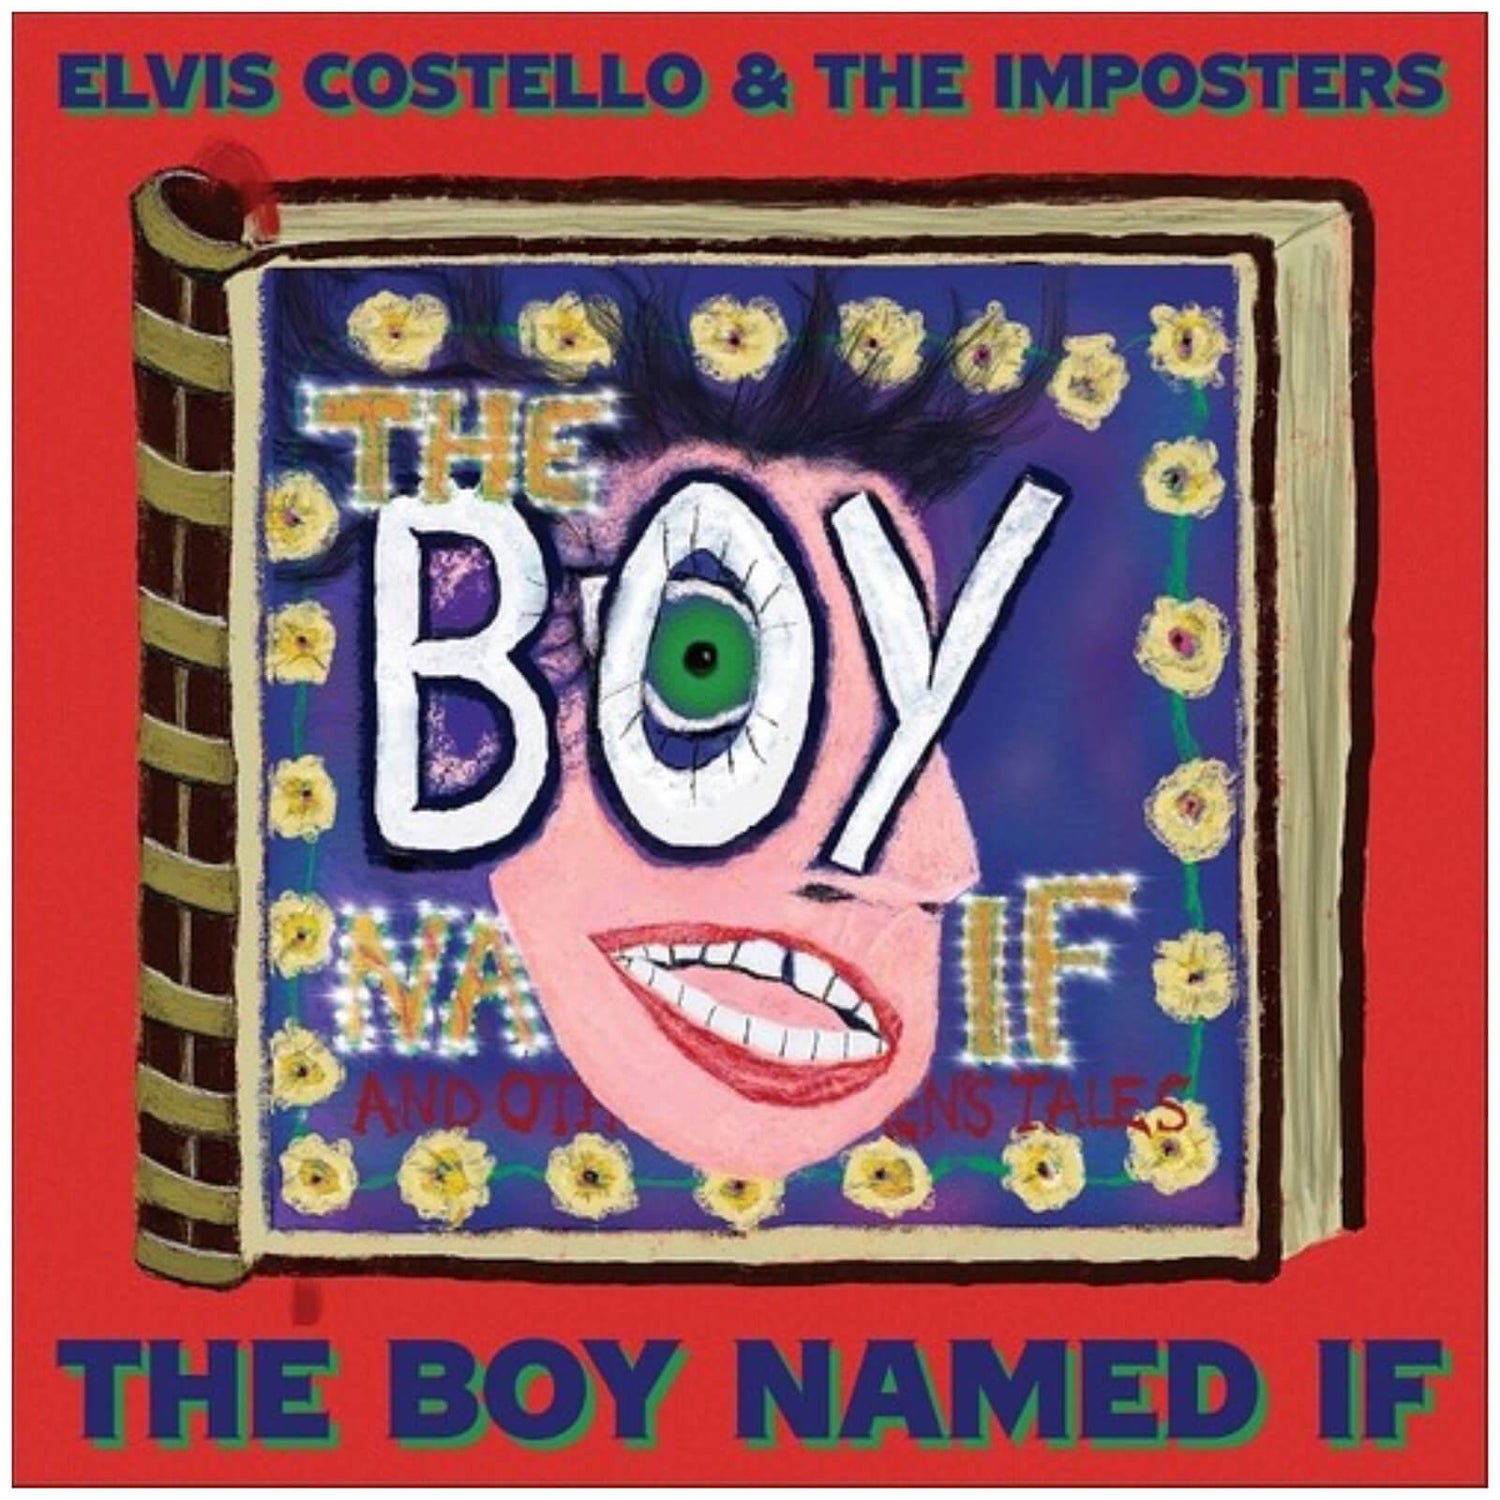 Elvis Costello & The Imposters - The Boy Named If Vinyl